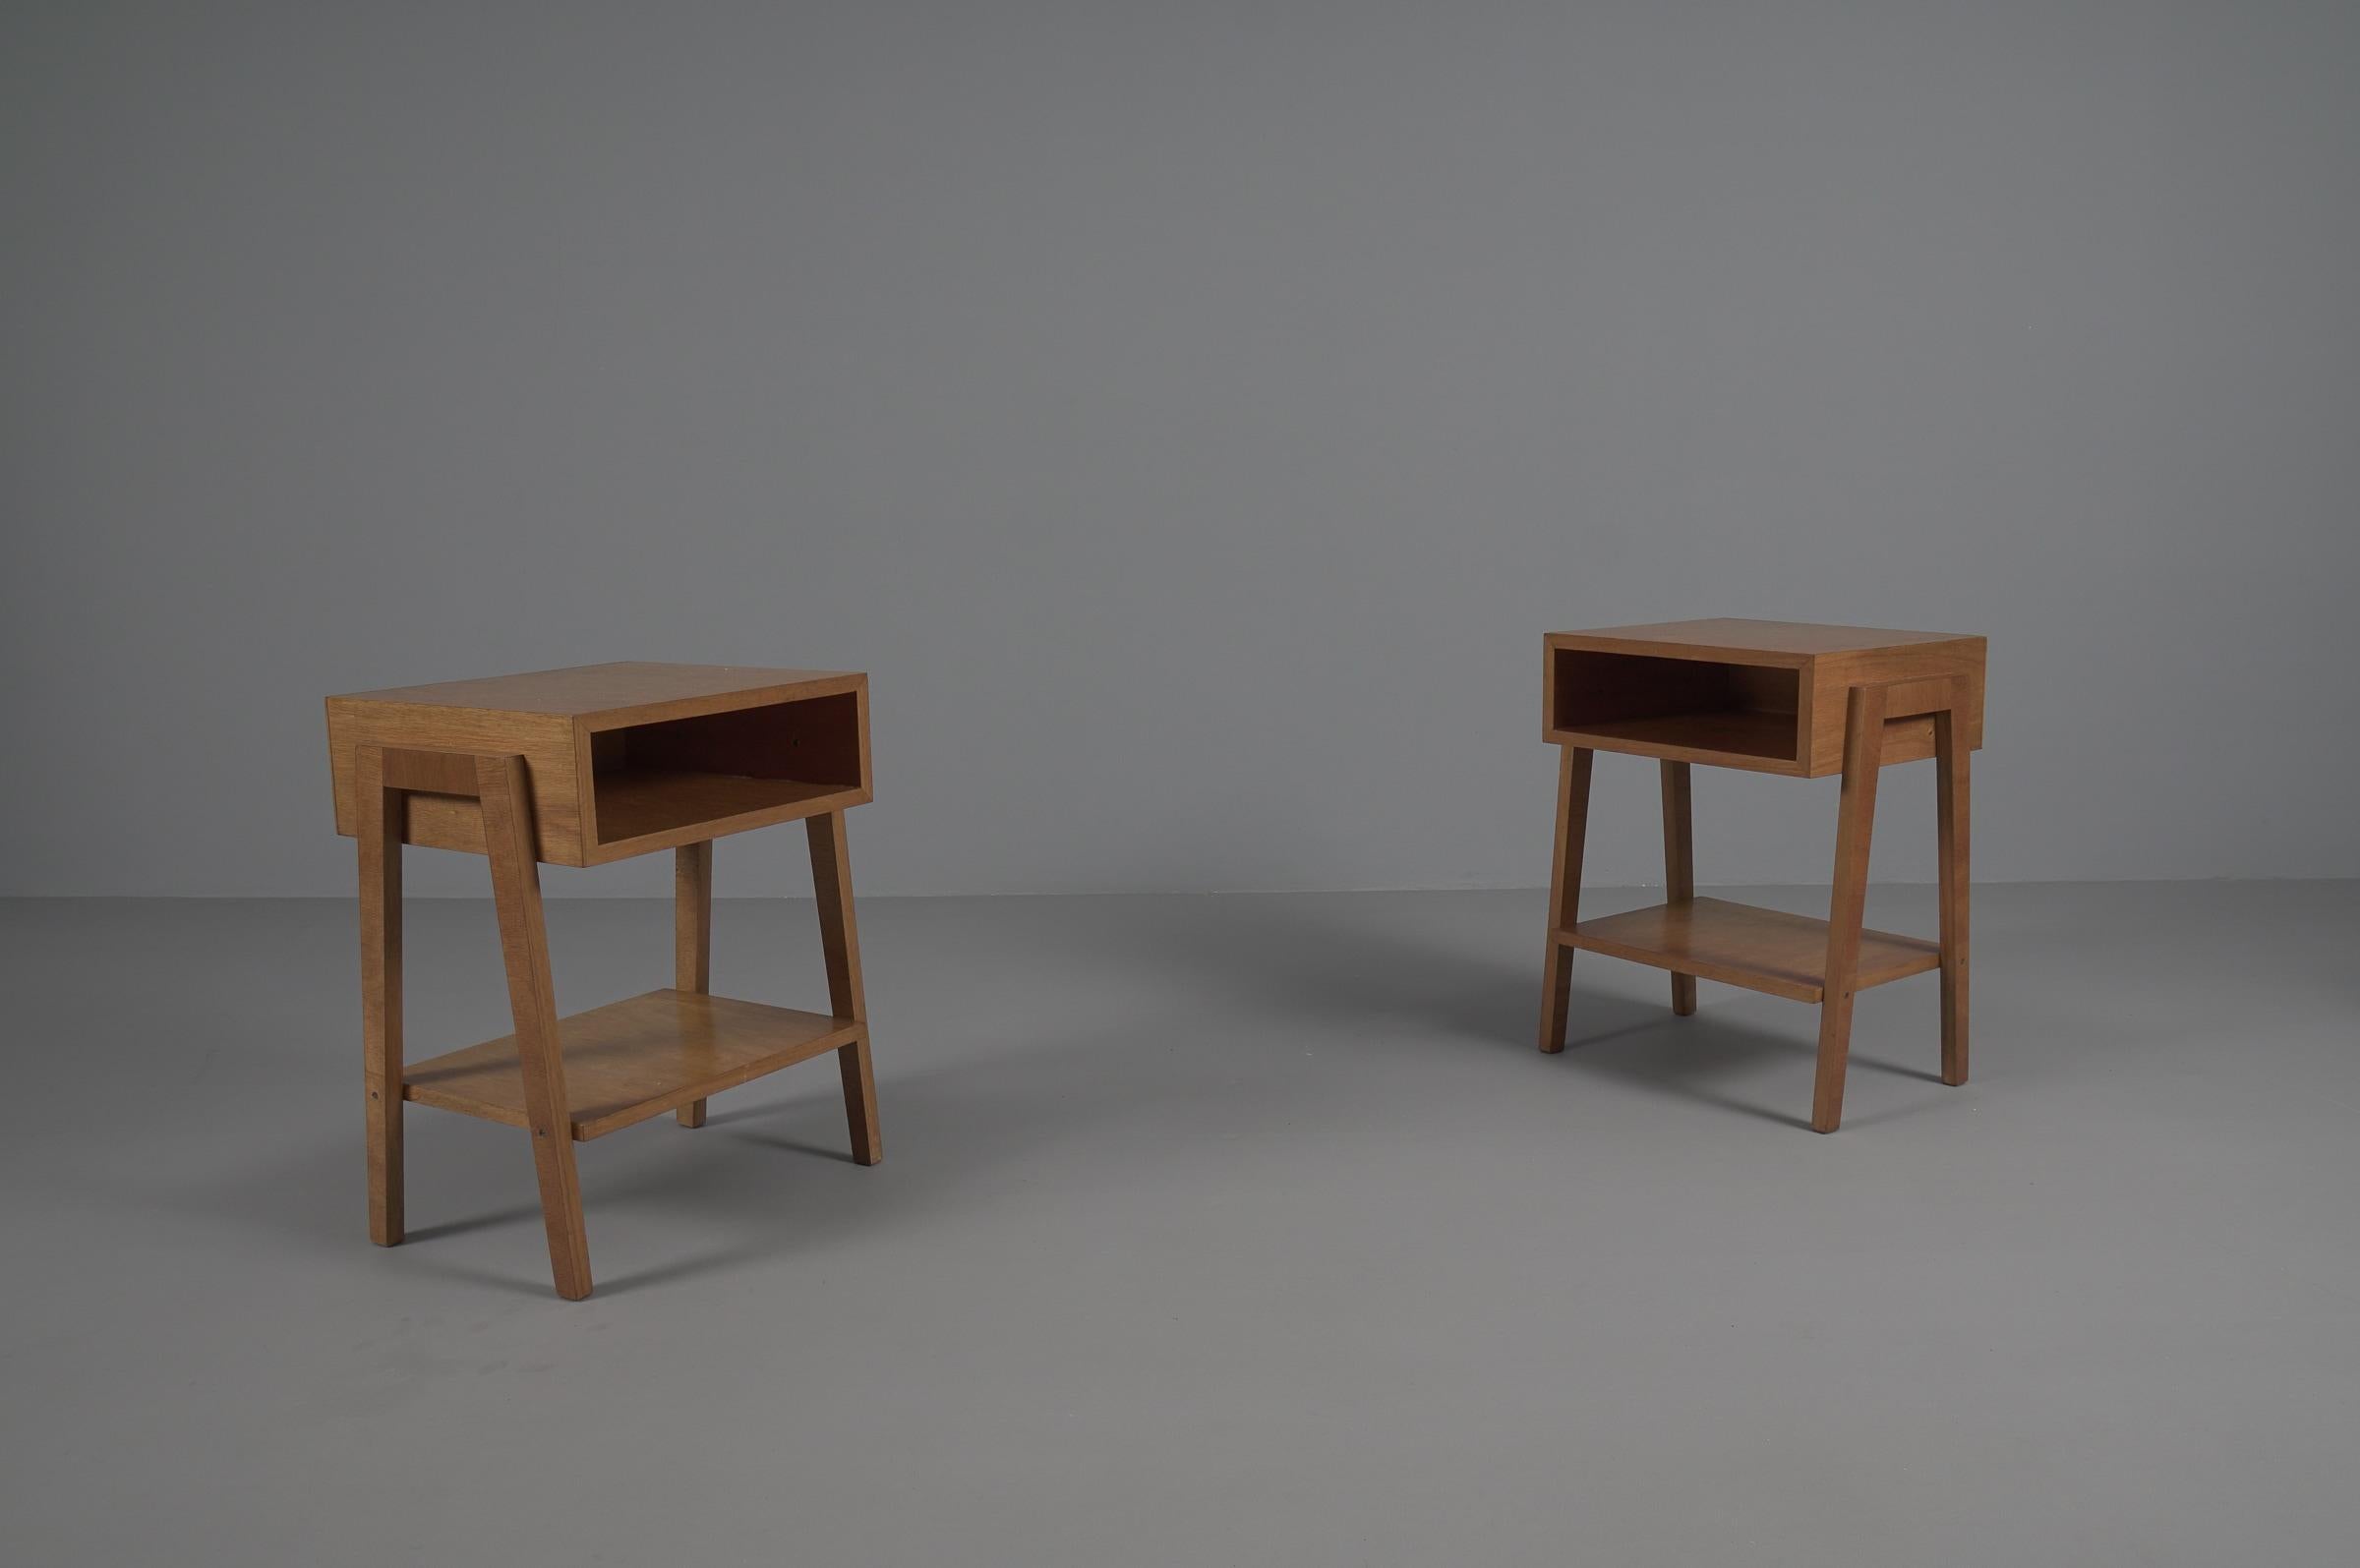 Italian  Pair of Minimalistic Mid-Century Modern Wooden Nightstands, Italy 1950s For Sale